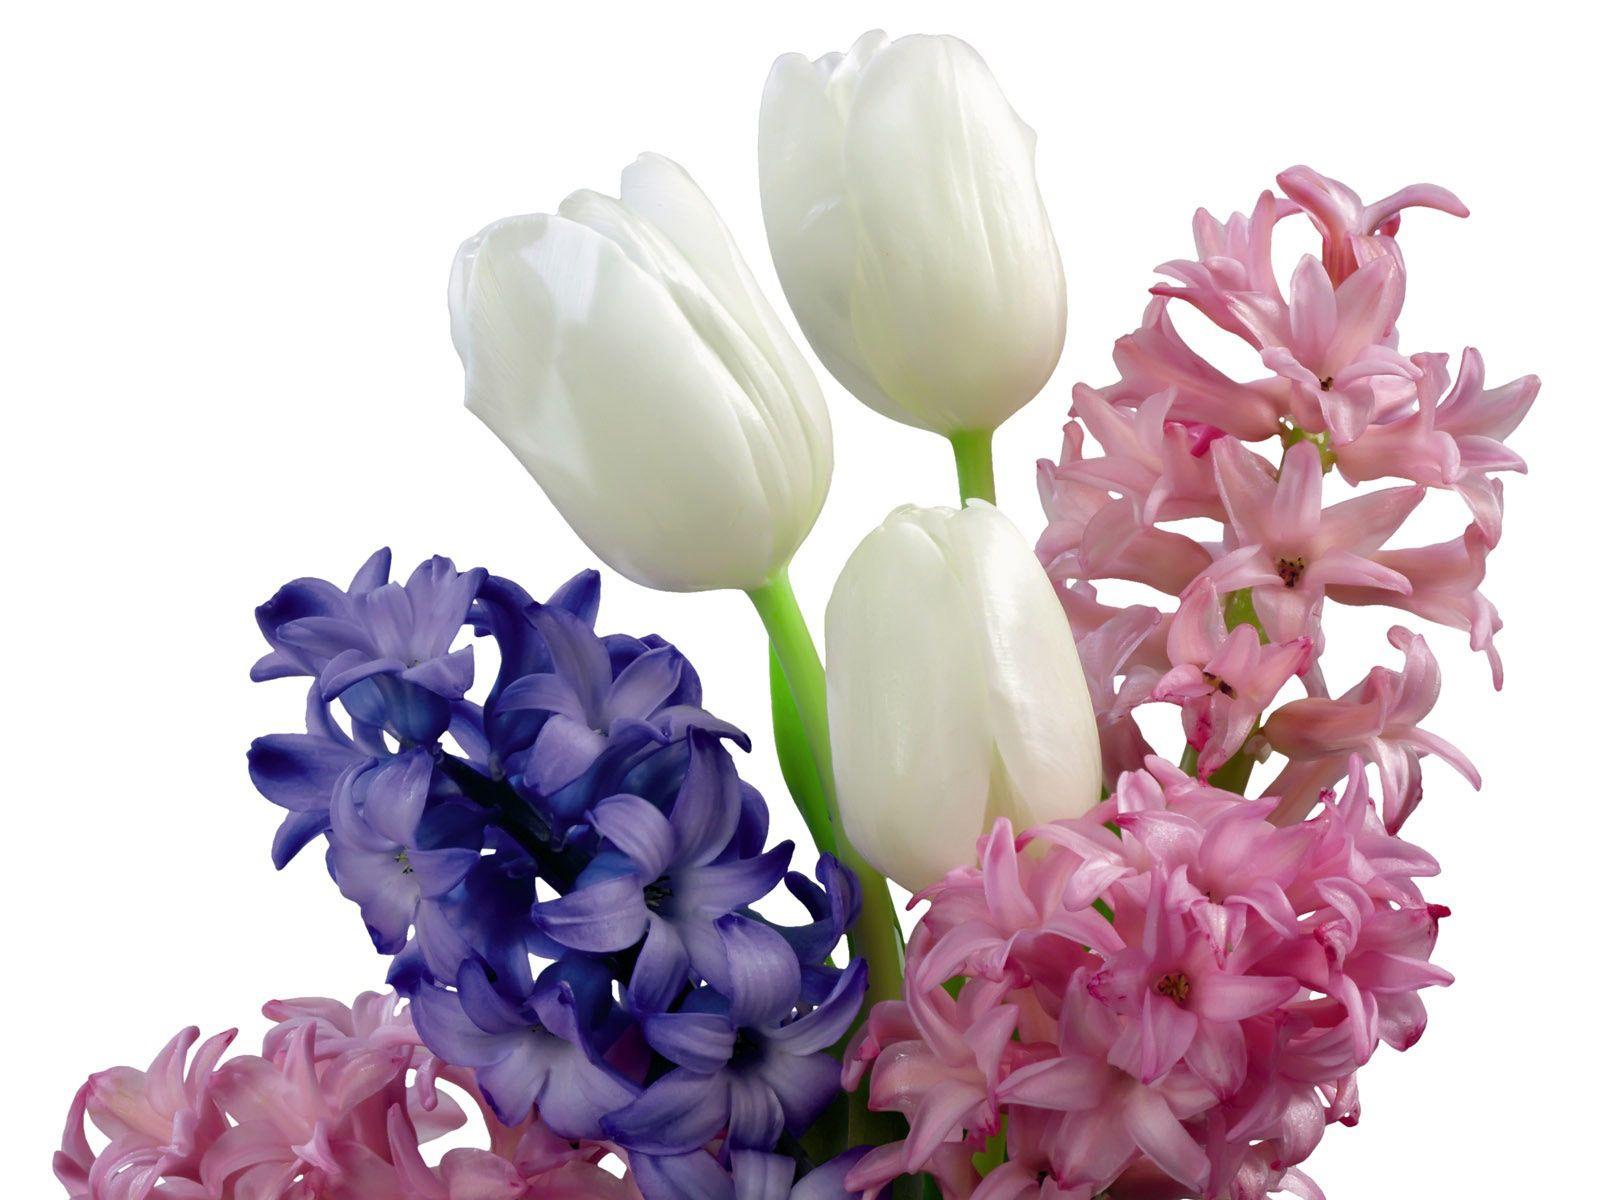 Desktop Wallpaper · Gallery · Nature · Tulips and Hyacinth bouquet